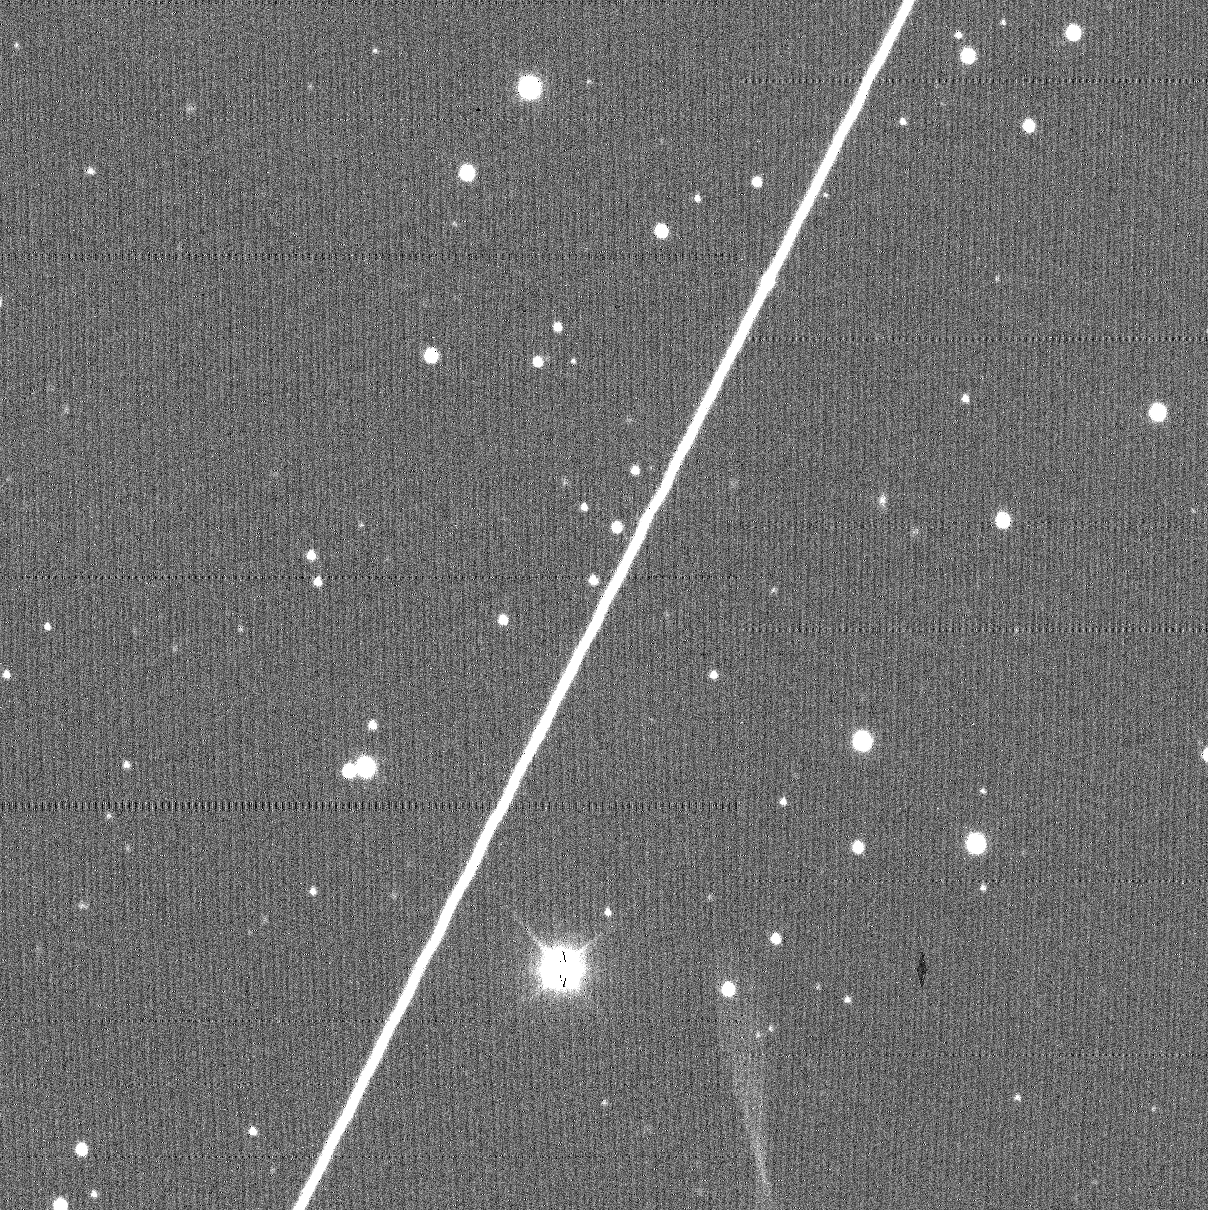 A grayscale image of stars disrupted by a satellite streak.